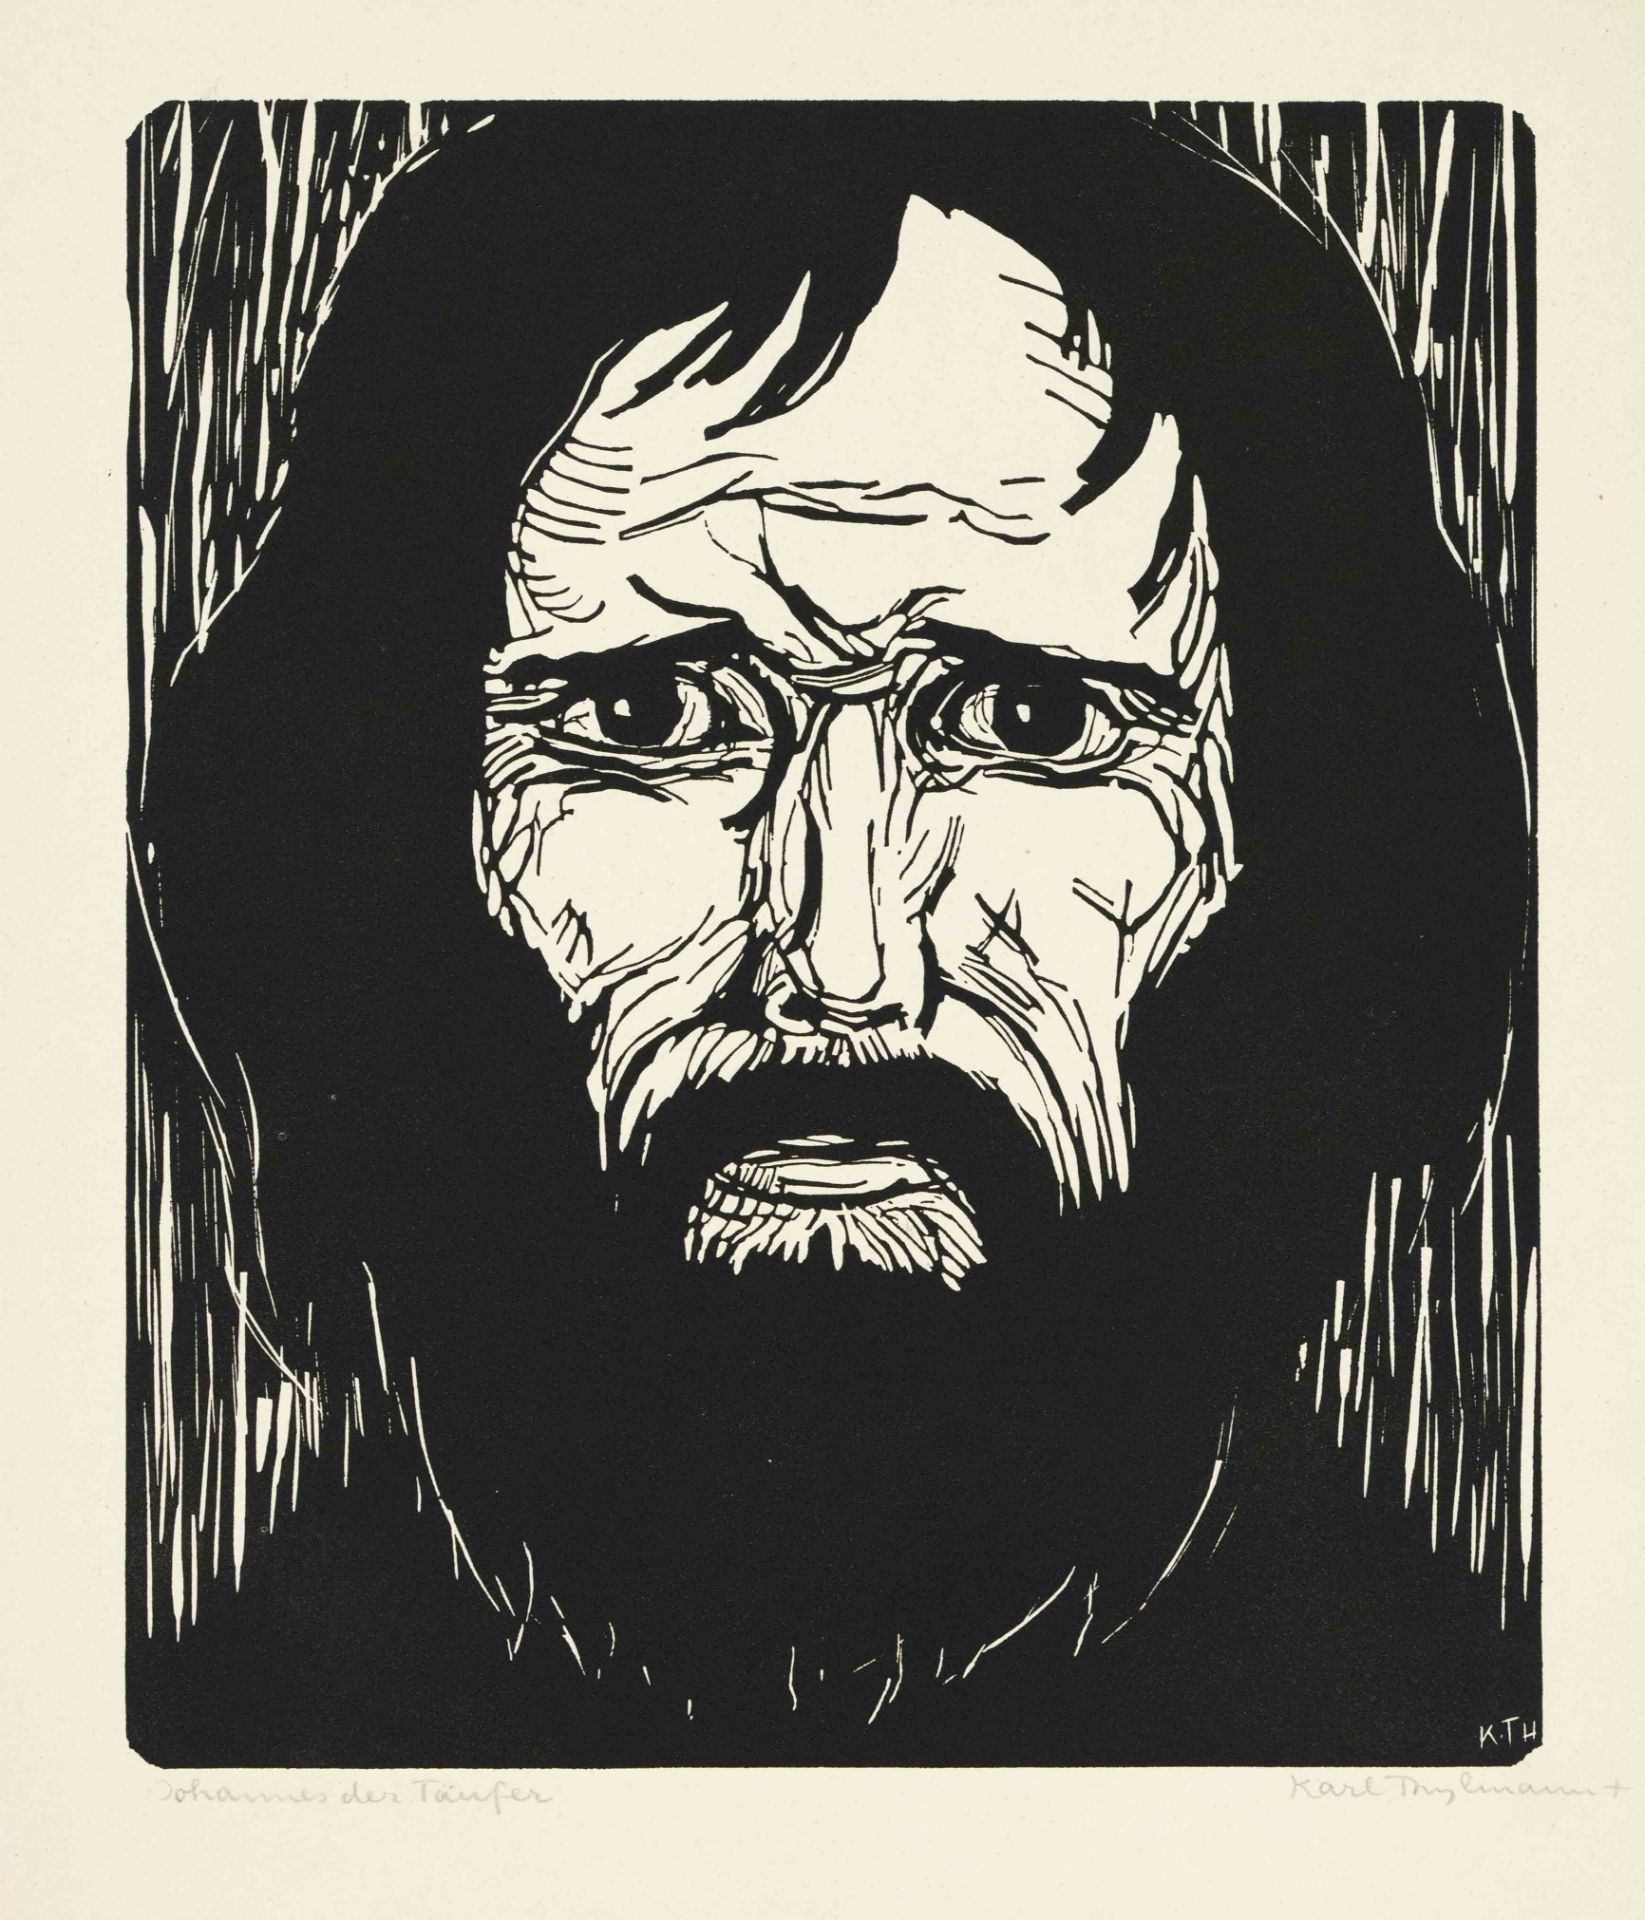 Karl Thylmann (1888-1916), 8 woodcuts by the German graphic artist and poet, who studied in Munich